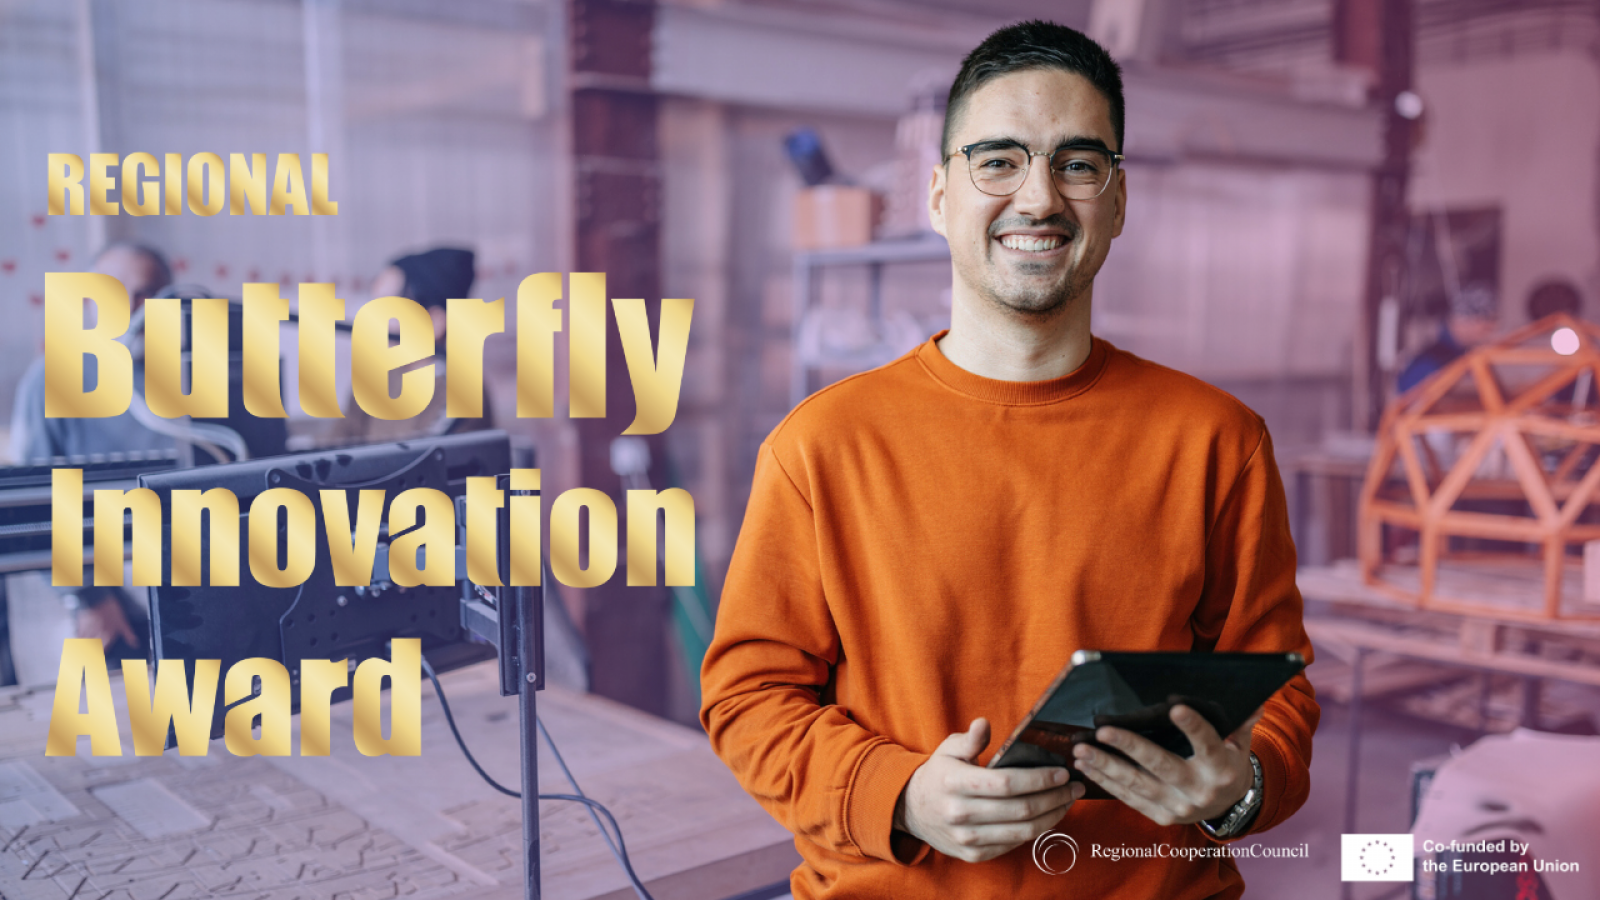 Don’t miss the opportunity to apply for Butterfly Innovation Award!